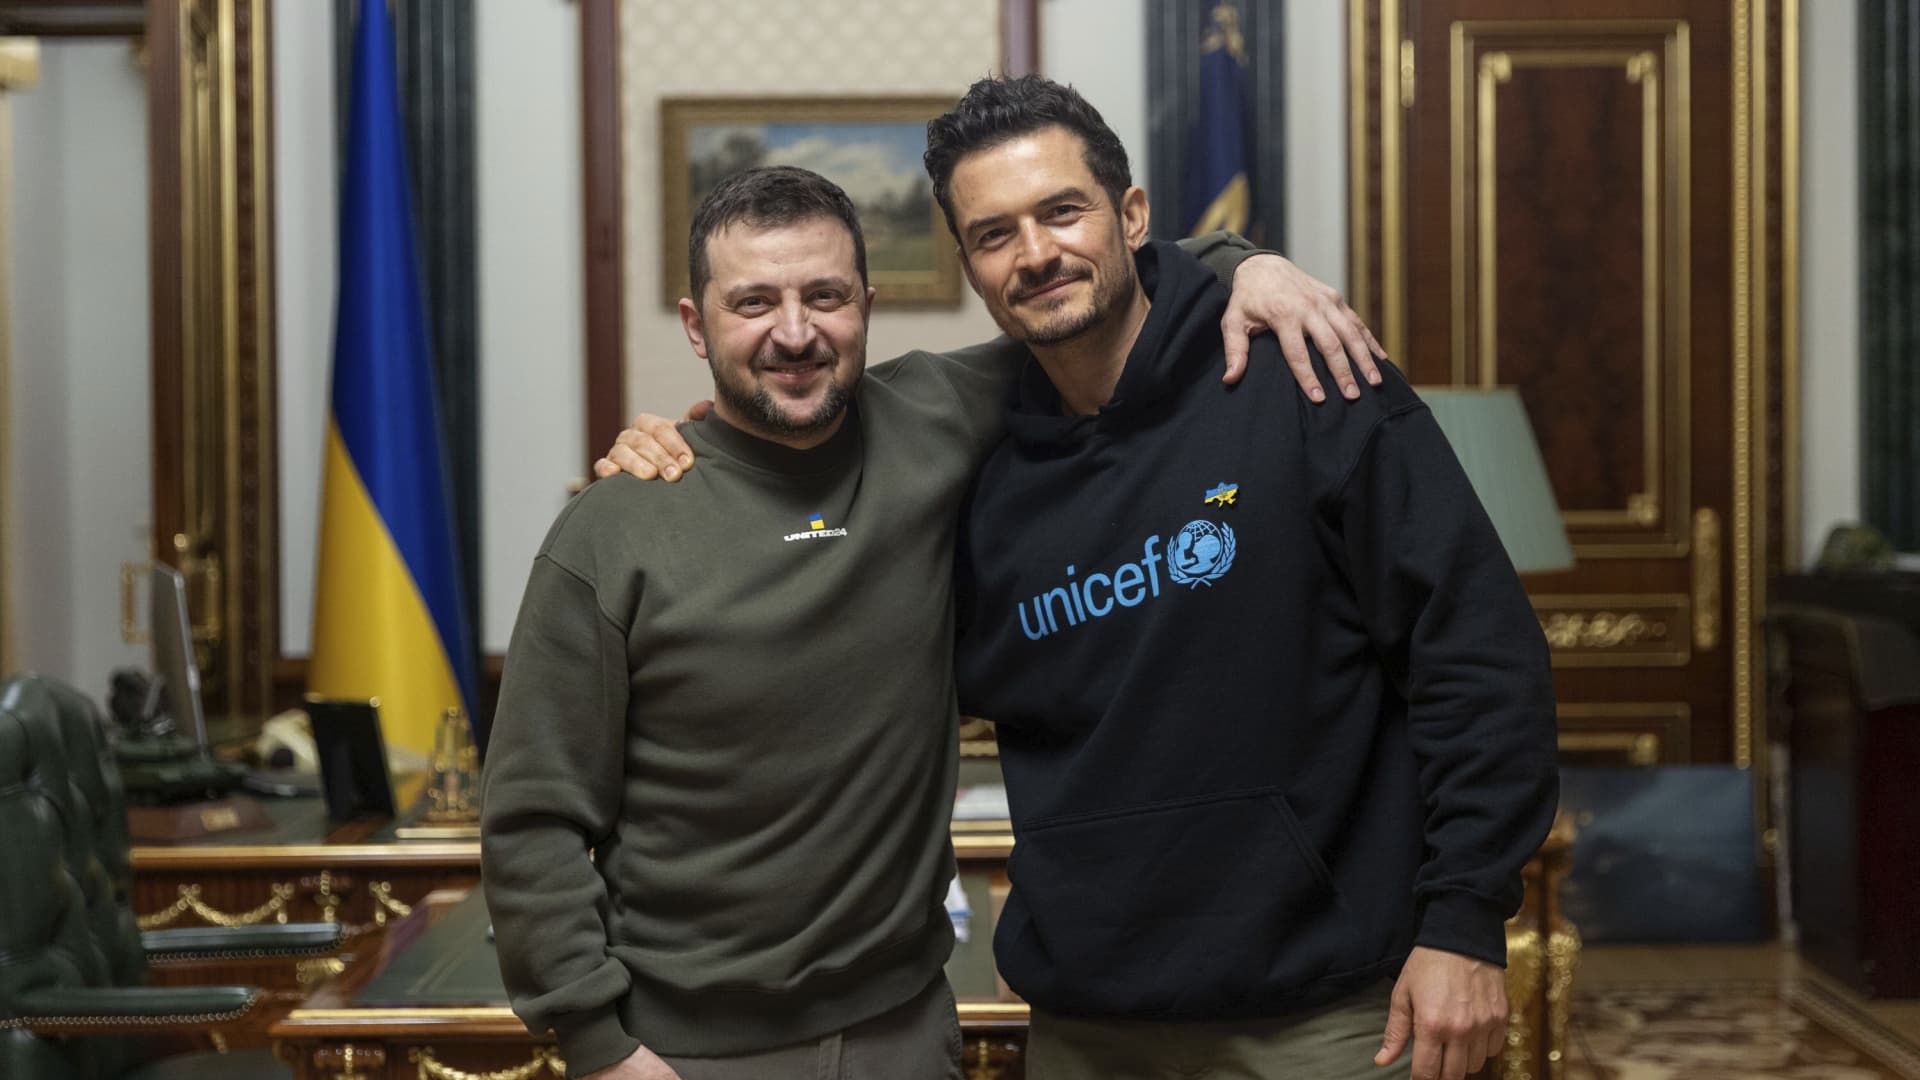 In this photo provided by the Ukrainian Presidential Press Office, Ukrainian President Volodymyr Zelenskyy, left, poses for photo with British actor and UNICEF Goodwill Ambassador Orlando Bloom during their meeting in Kyiv, Ukraine, Sunday, March 26, 2023.